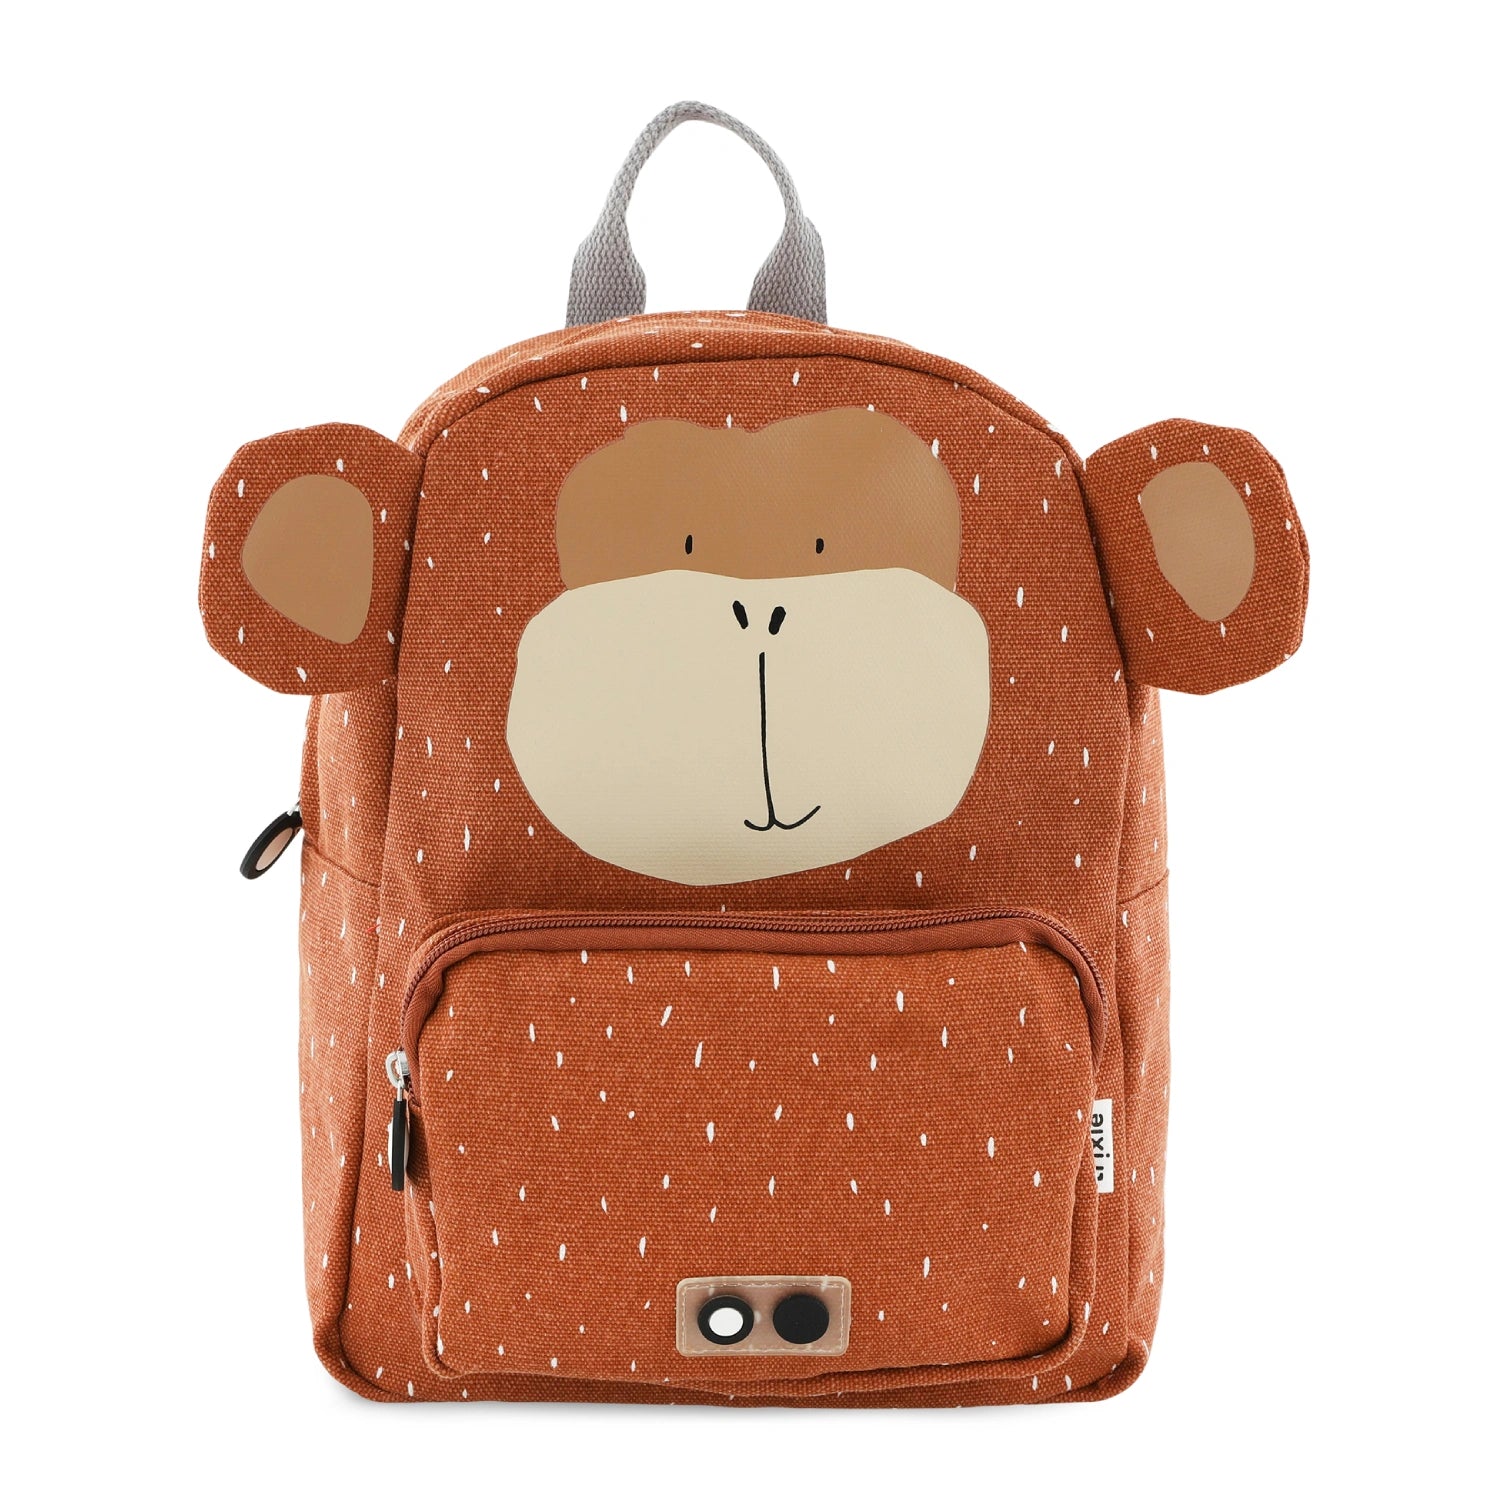 An image of Kids School Backpack - Trixie Bag Collection Mr. Monkey